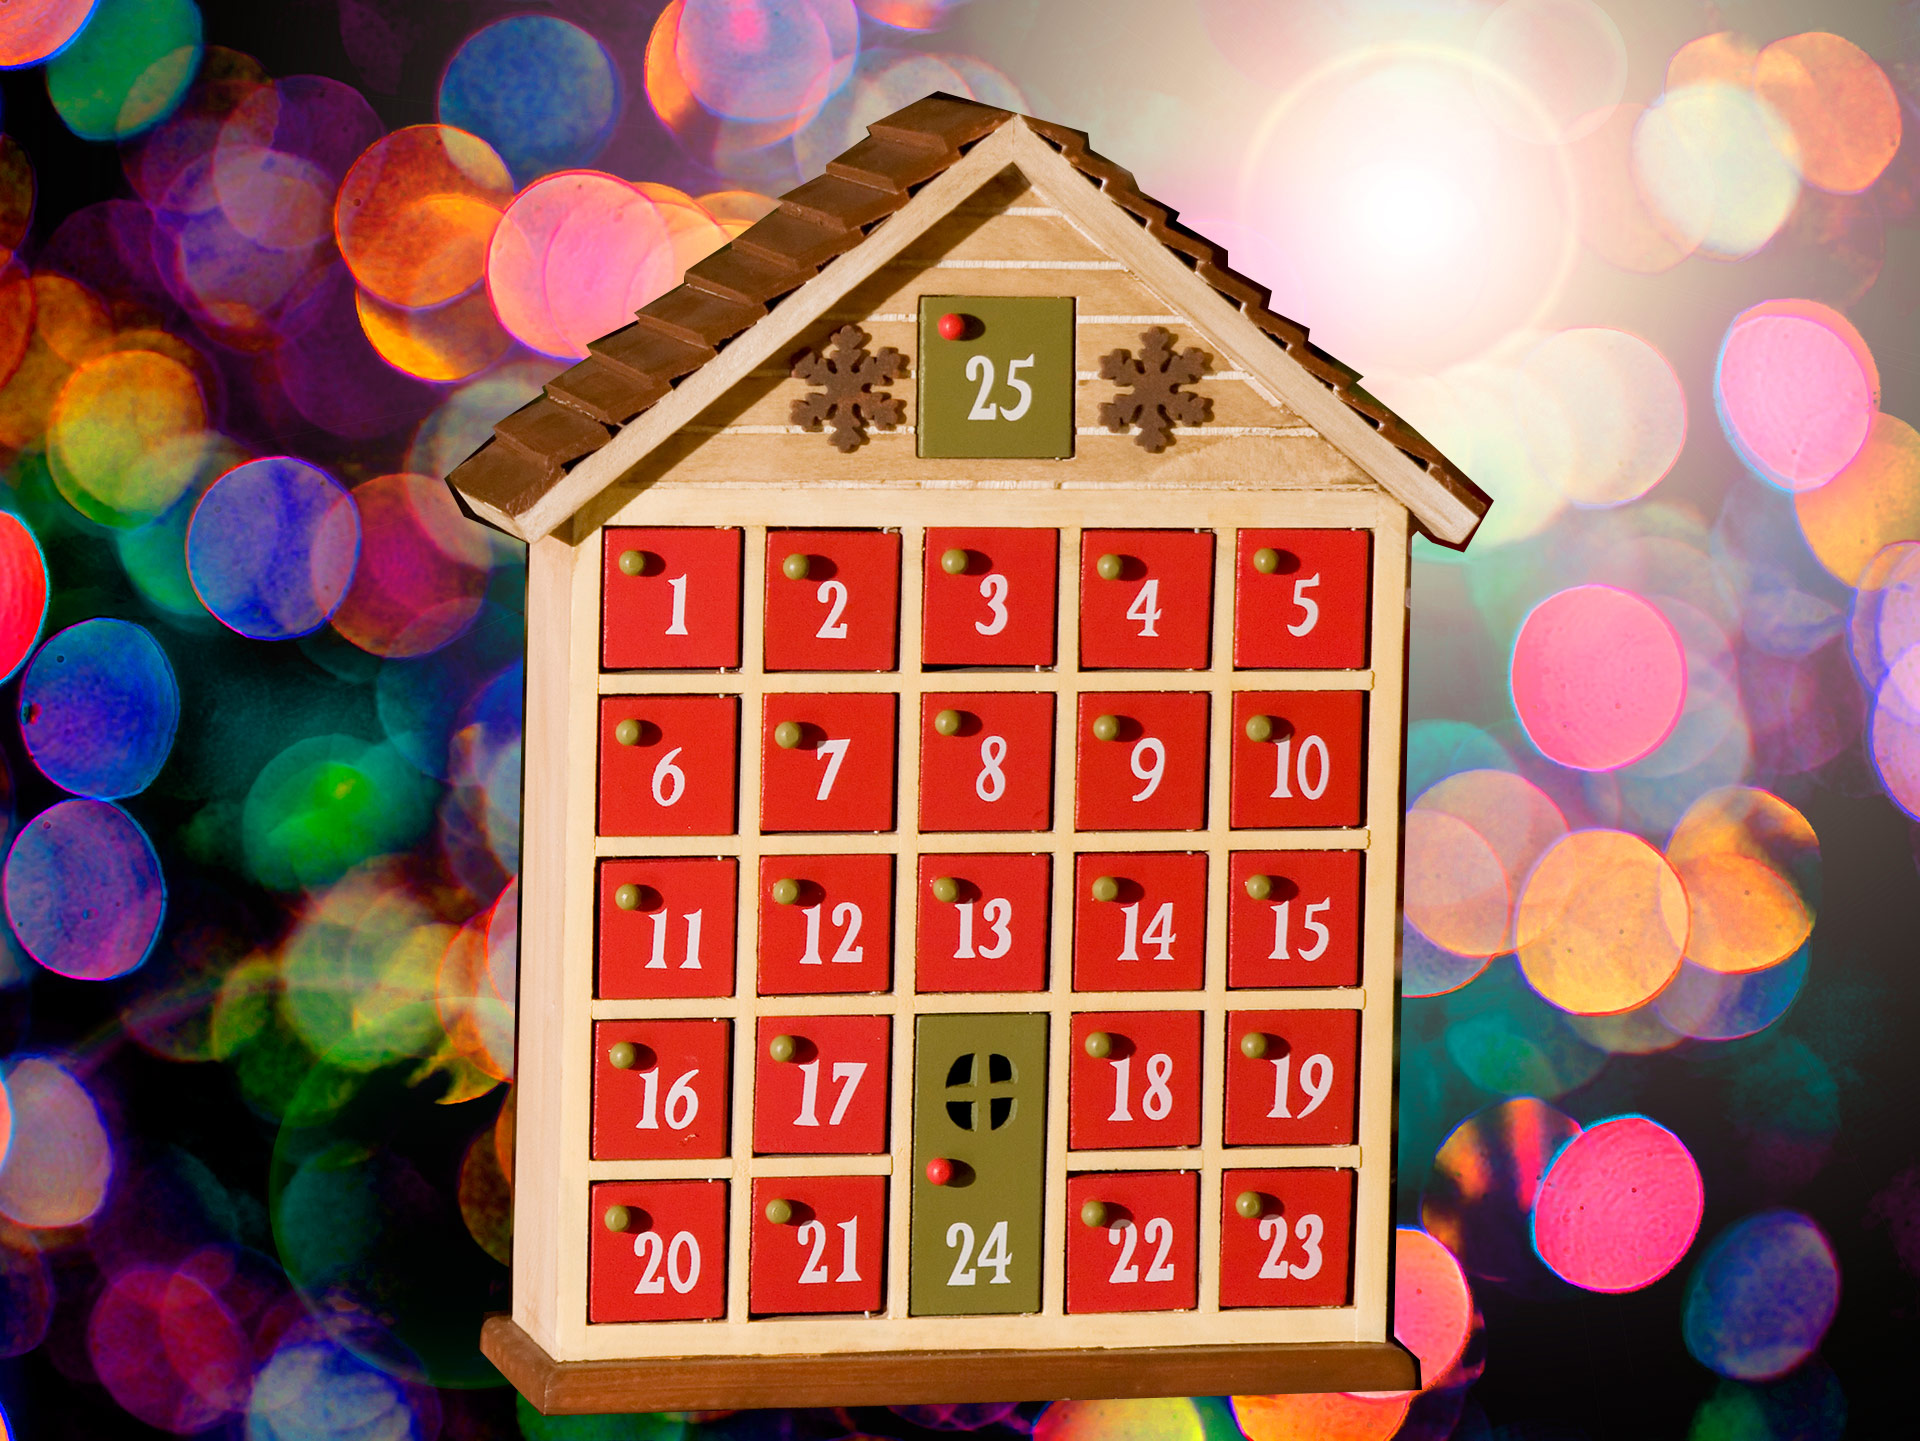 Adult advent calendar ideas that are actually fun